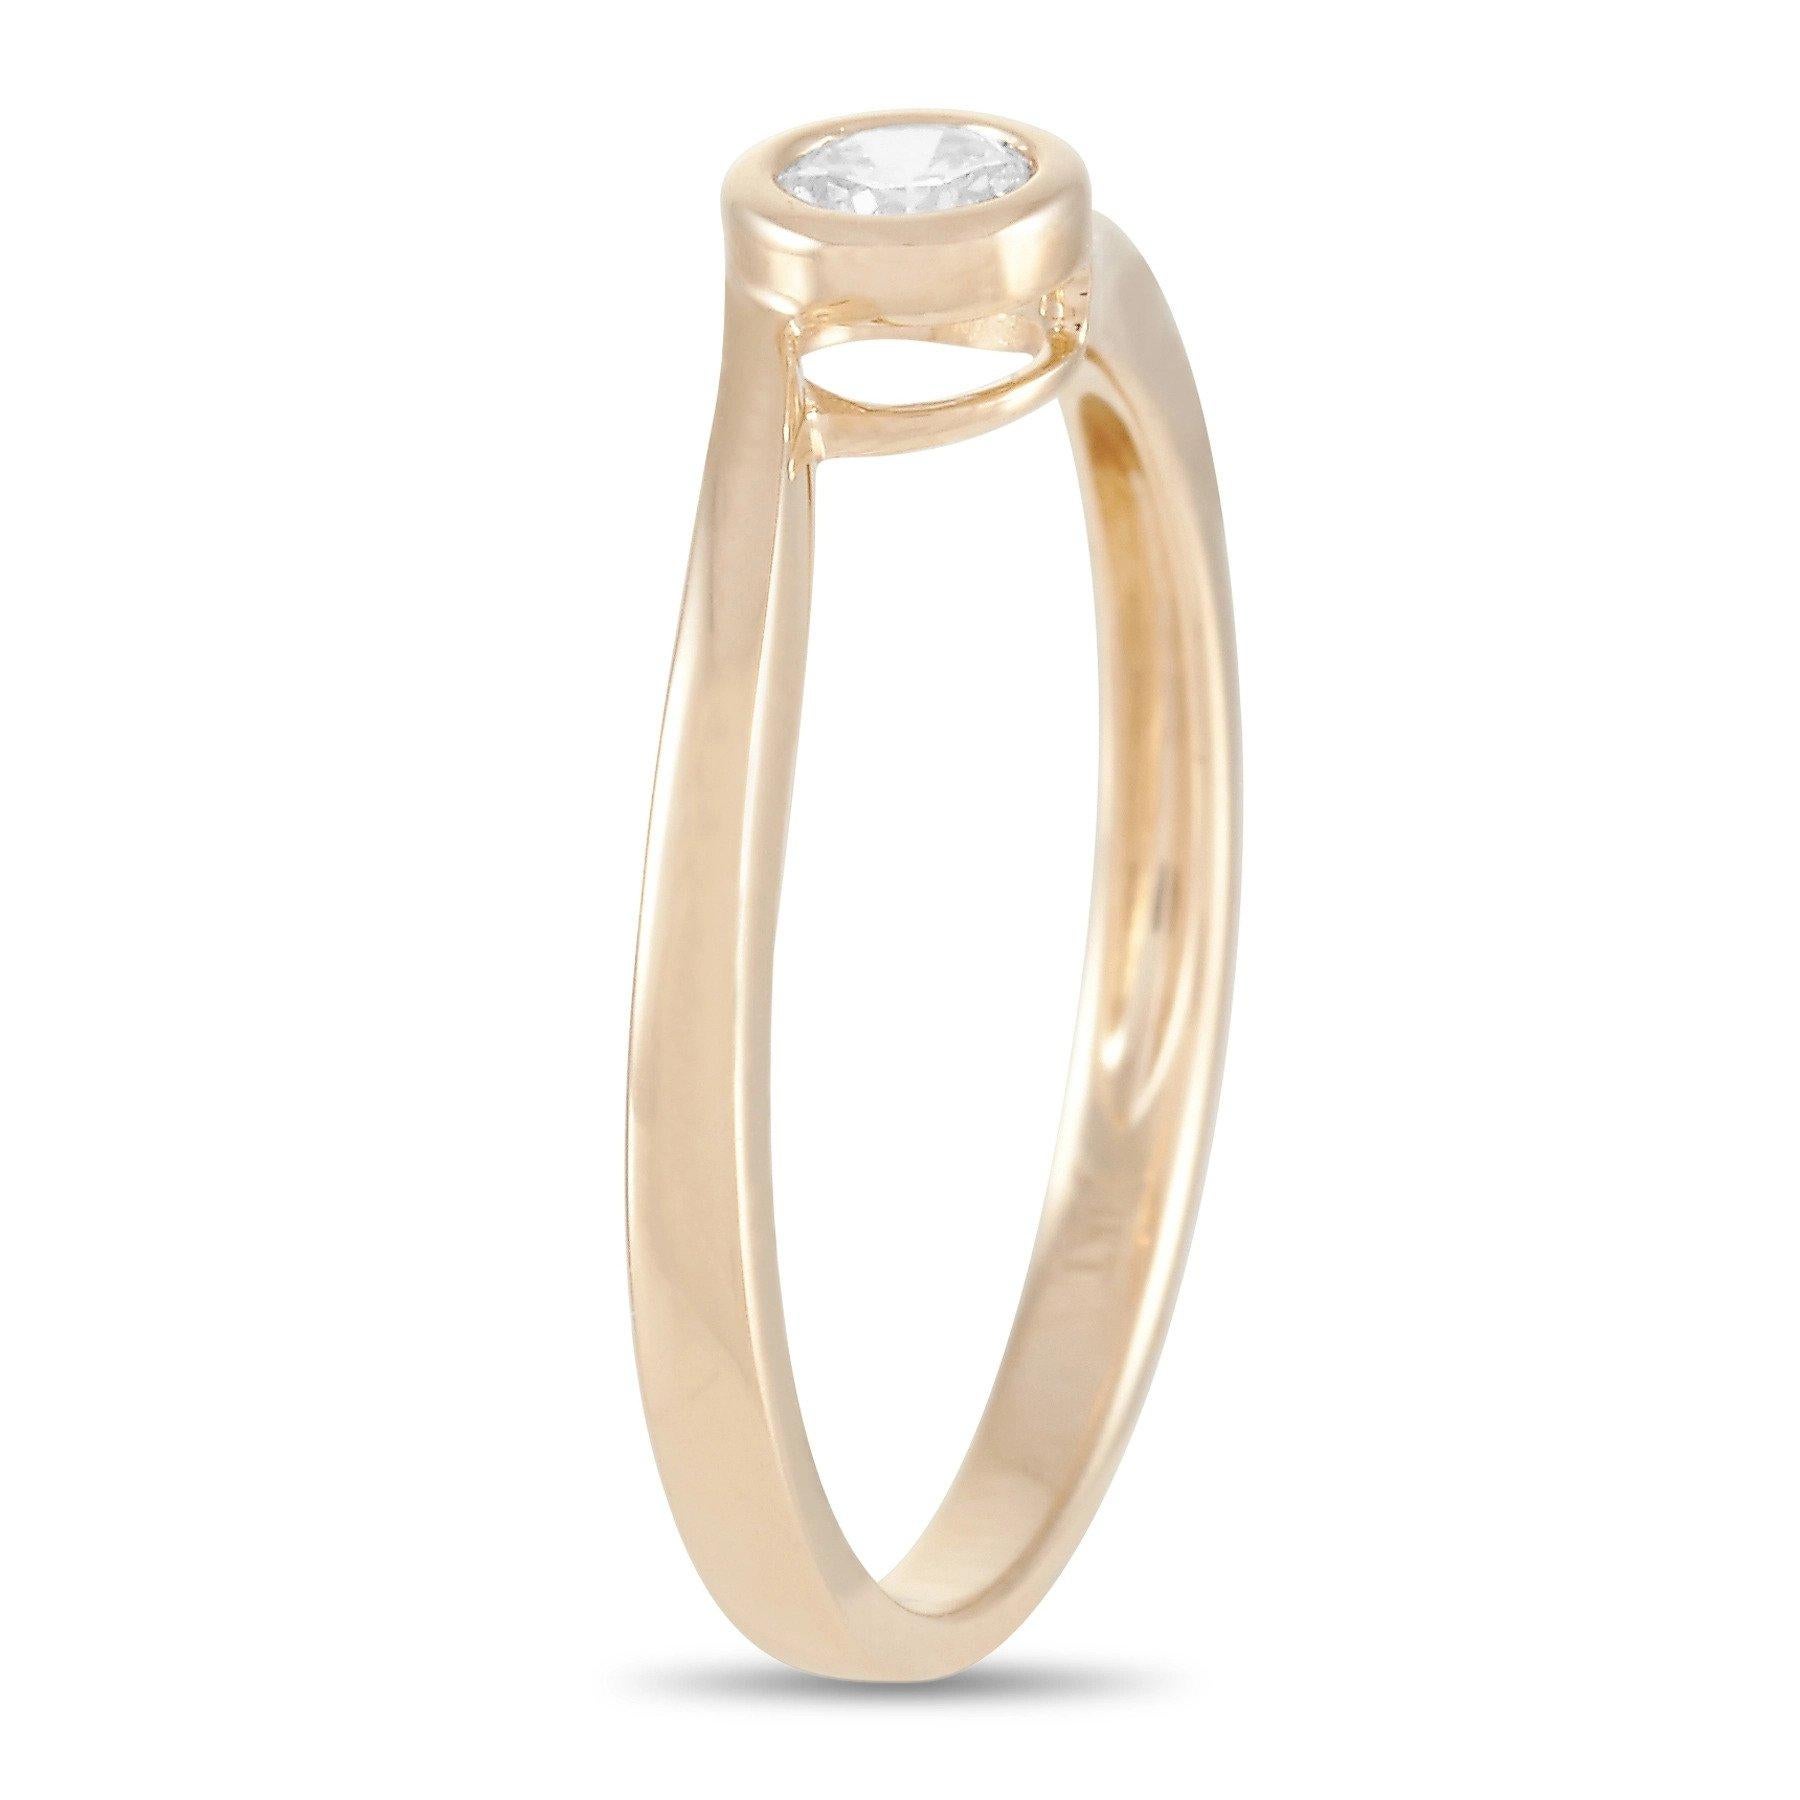 This LB Exclusive ring is made of 14K yellow gold and embellished with a 0.26 ct diamond stone. The ring weighs 1.7 grams and boasts band thickness of 2 mm and top height of 4 mm, while top dimensions measure 4 by 4 mm.
 
 Offered in brand new